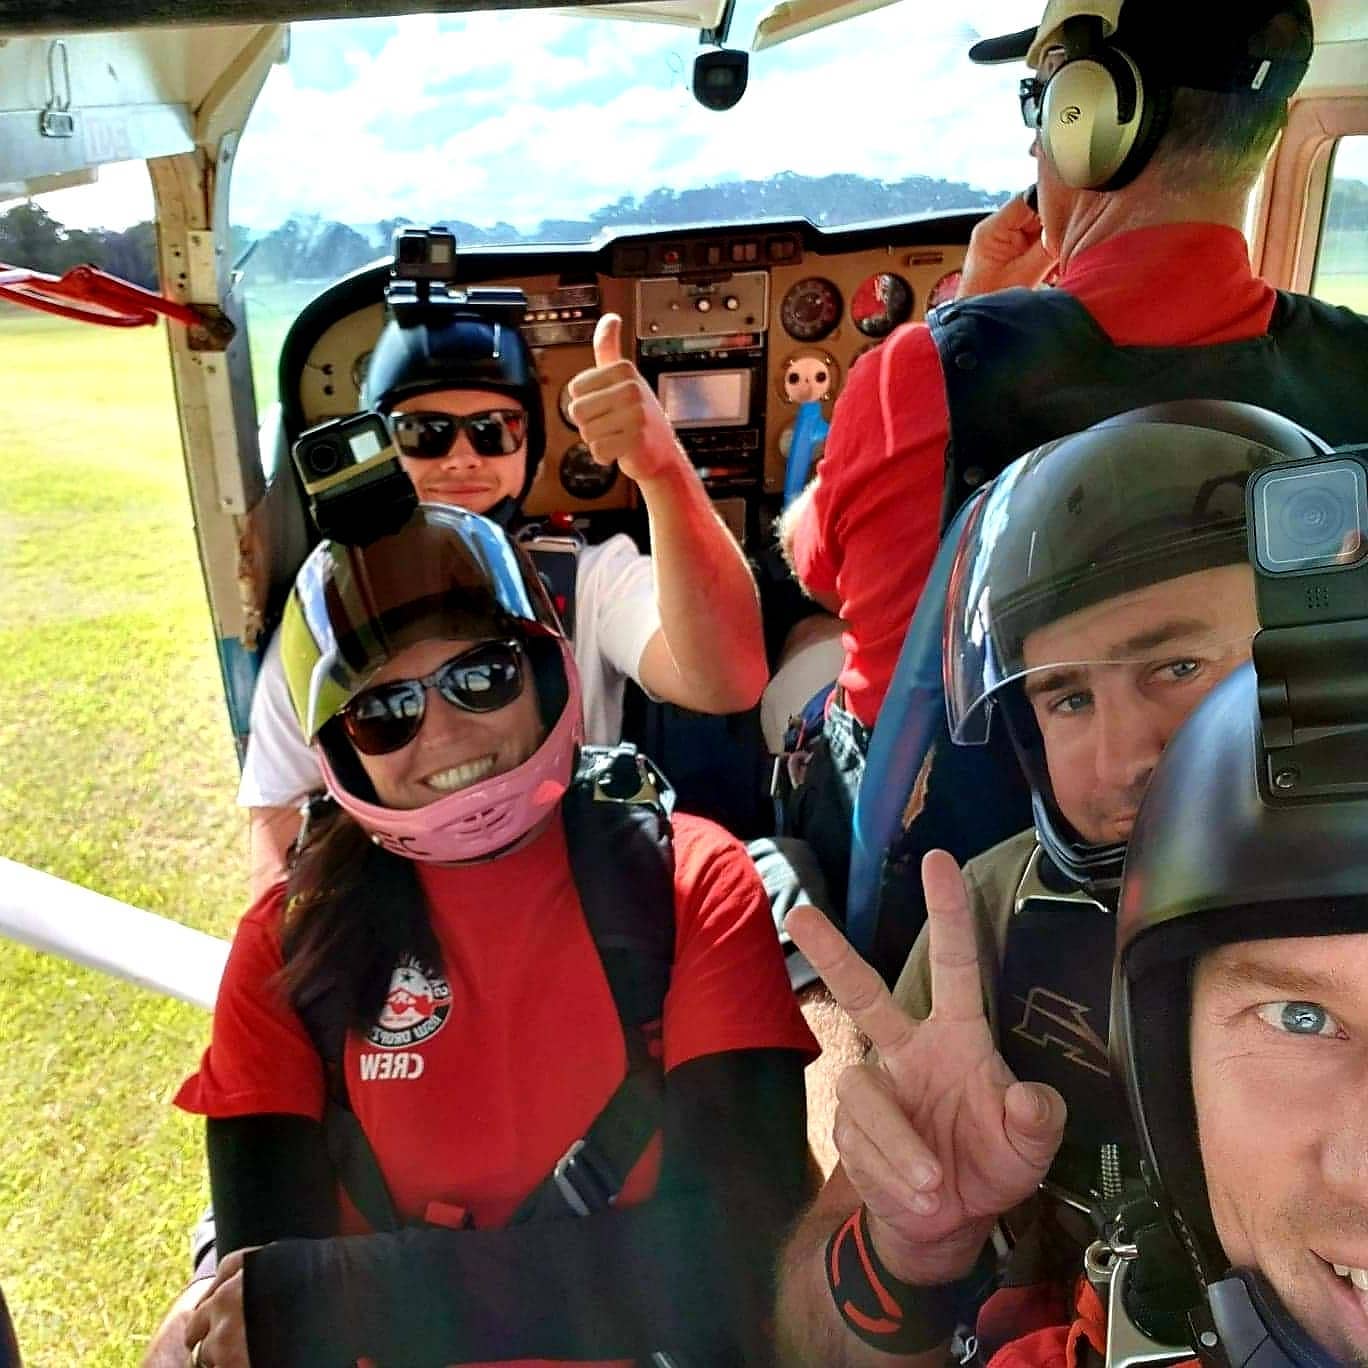 Skydiving Team Inside the Plane - Skydiving in Taree, NSW